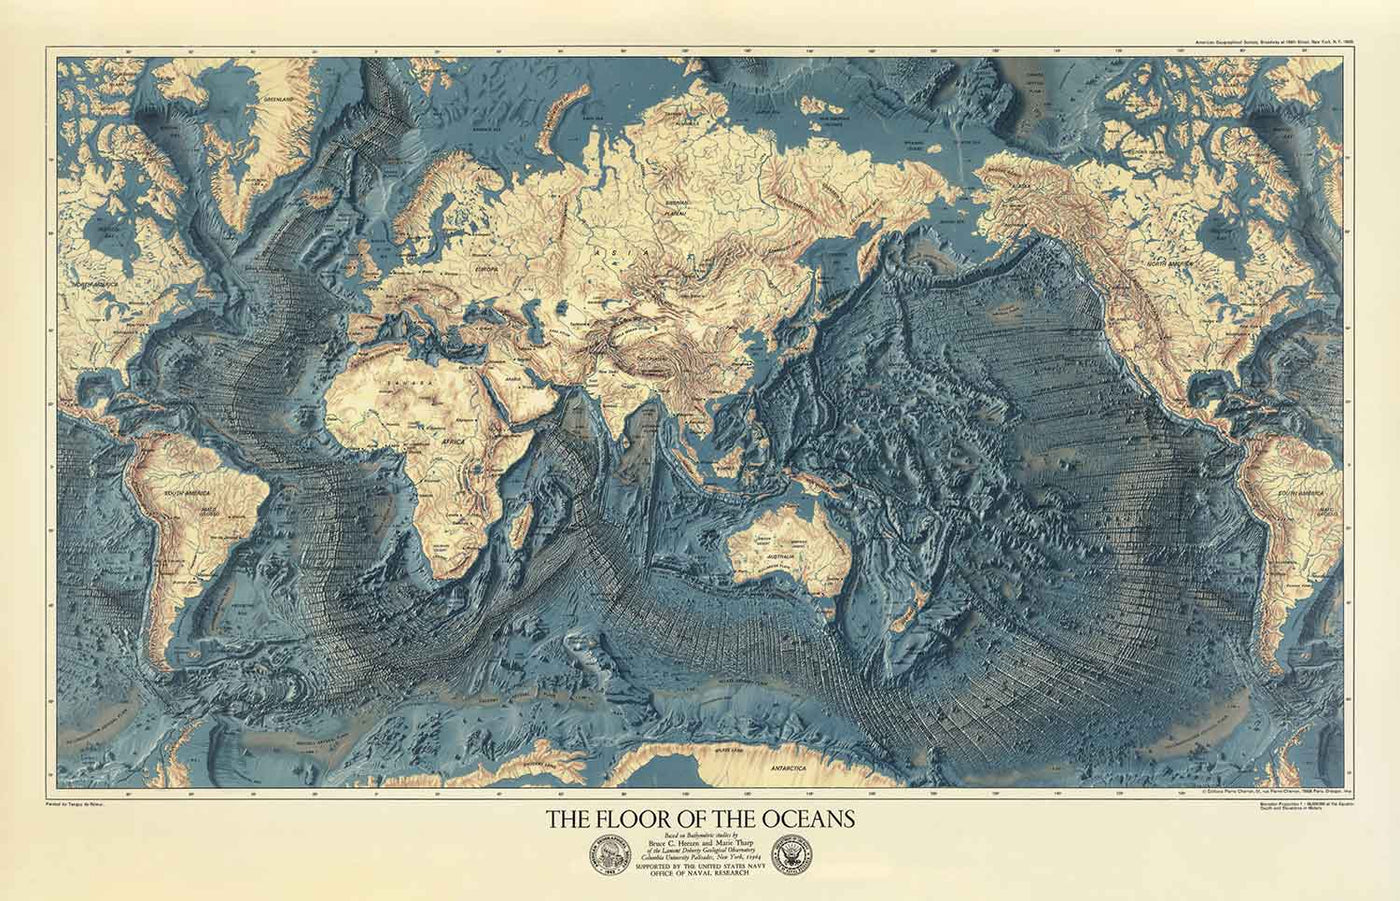 Rare Old Map of the Ocean Floor and Land Relief by the US Navy in 1976 - Europe, Africa, Americas, Antarctica, Australia